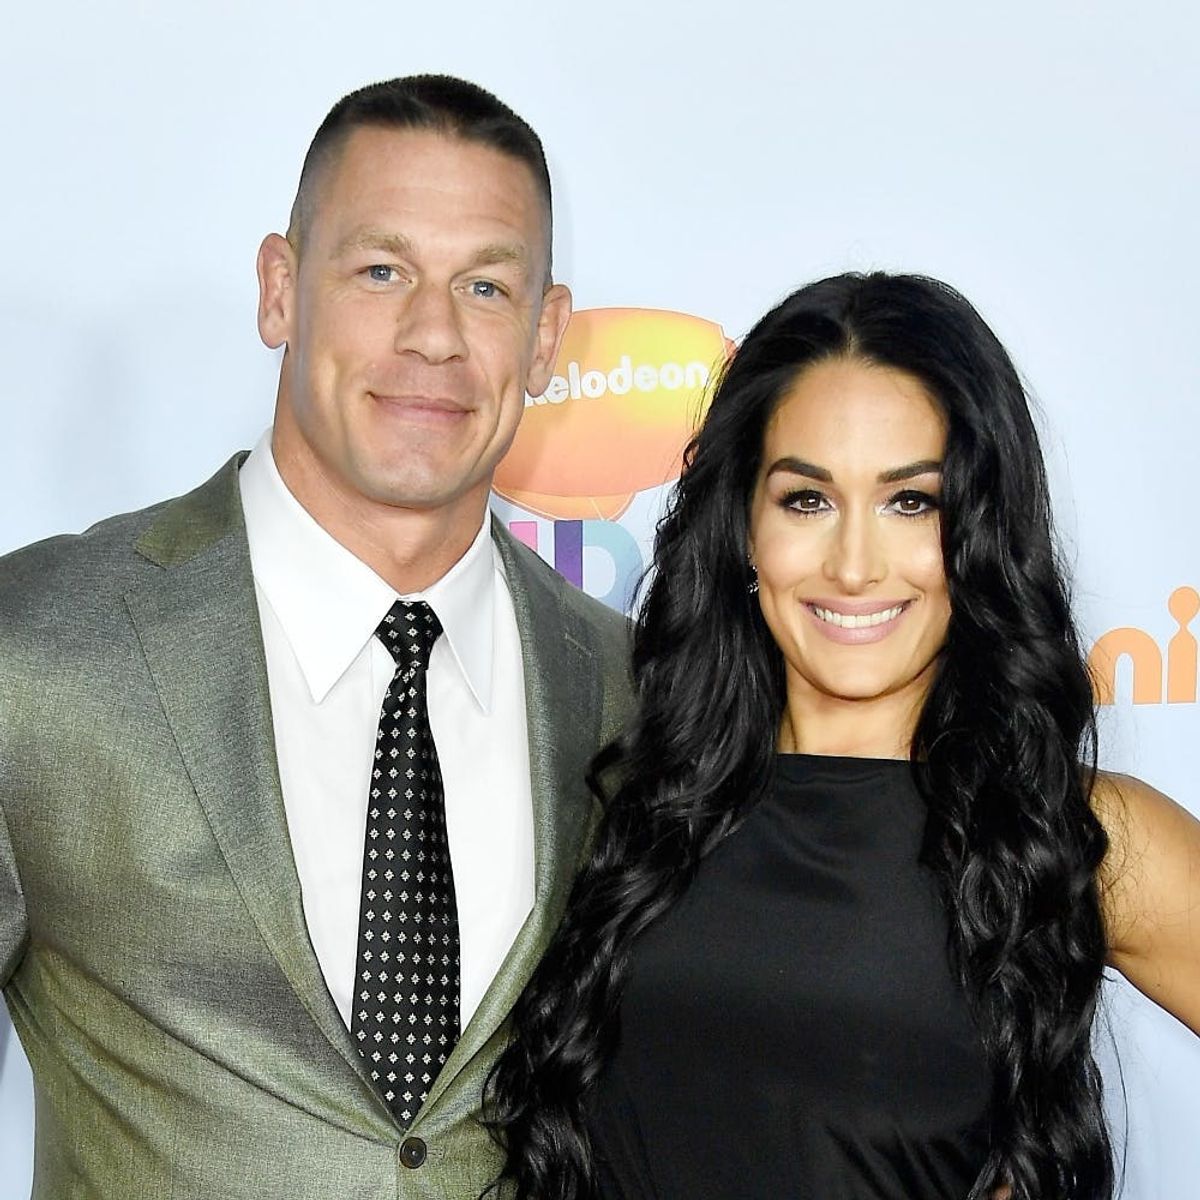 John Cena’s Wrestlemania Proposal Included One Very Surprising Detail